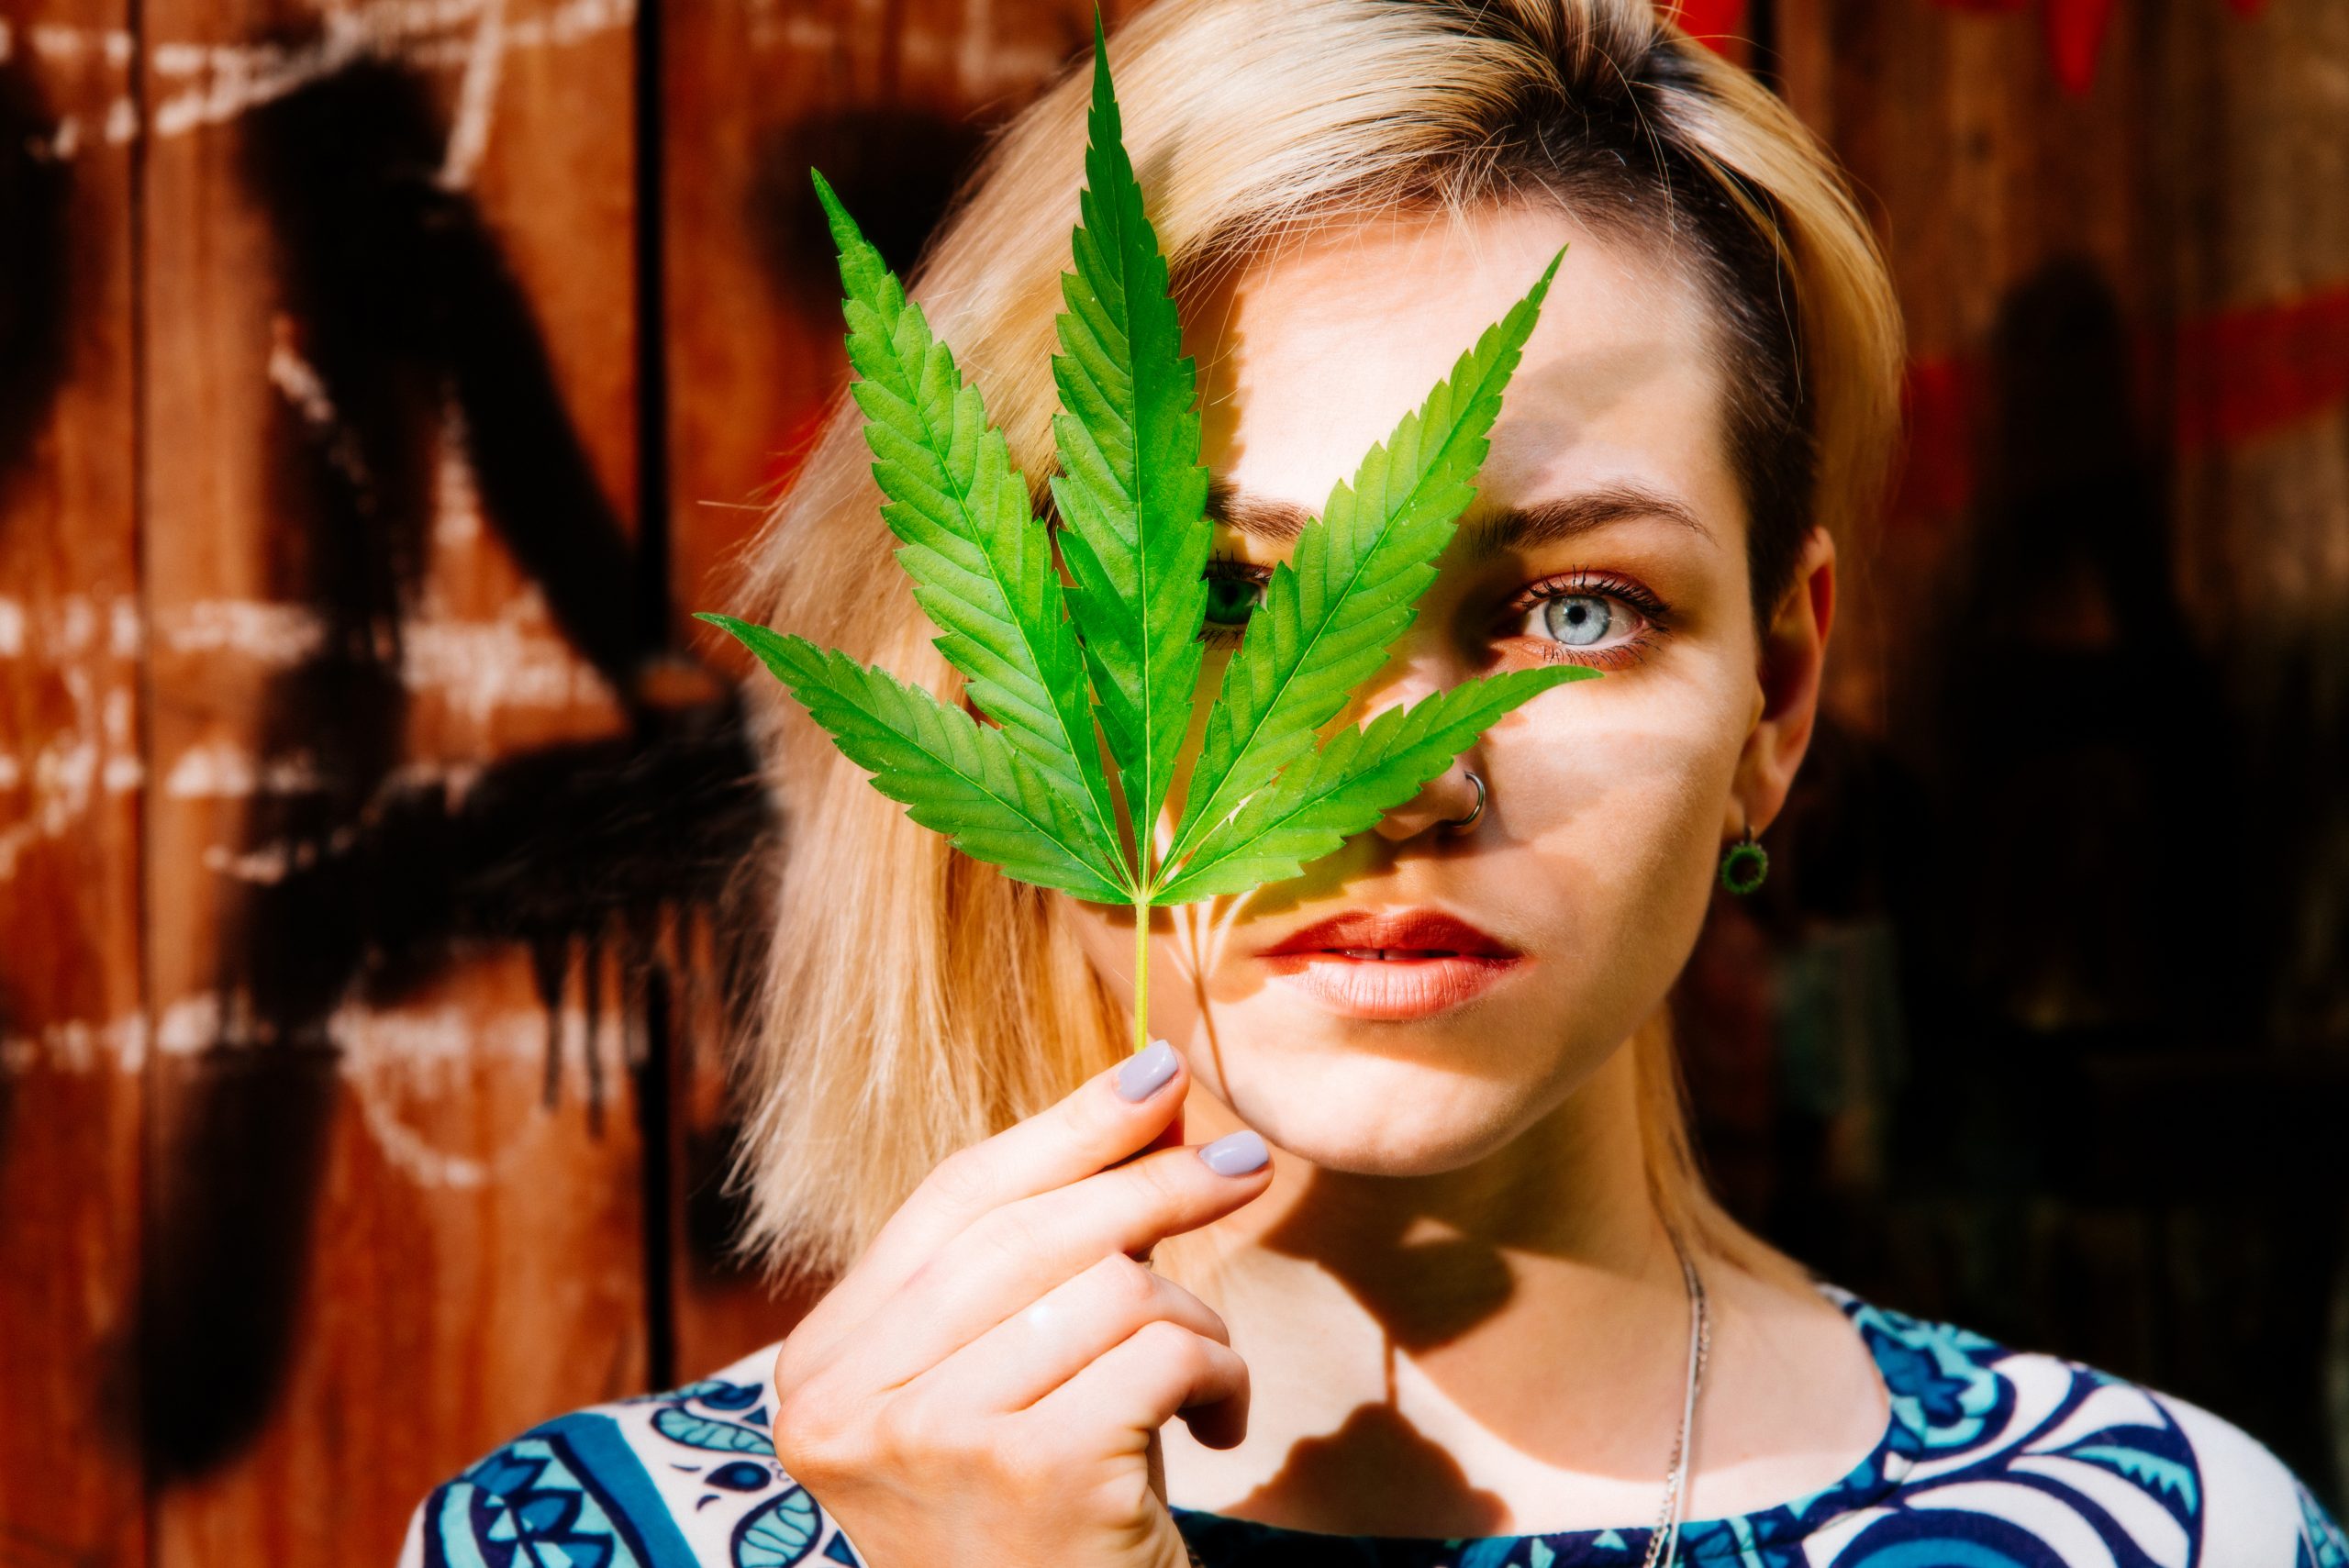 GIRL AND CANNABIS PLANT 164221597 1 scaled 1 | Smoking